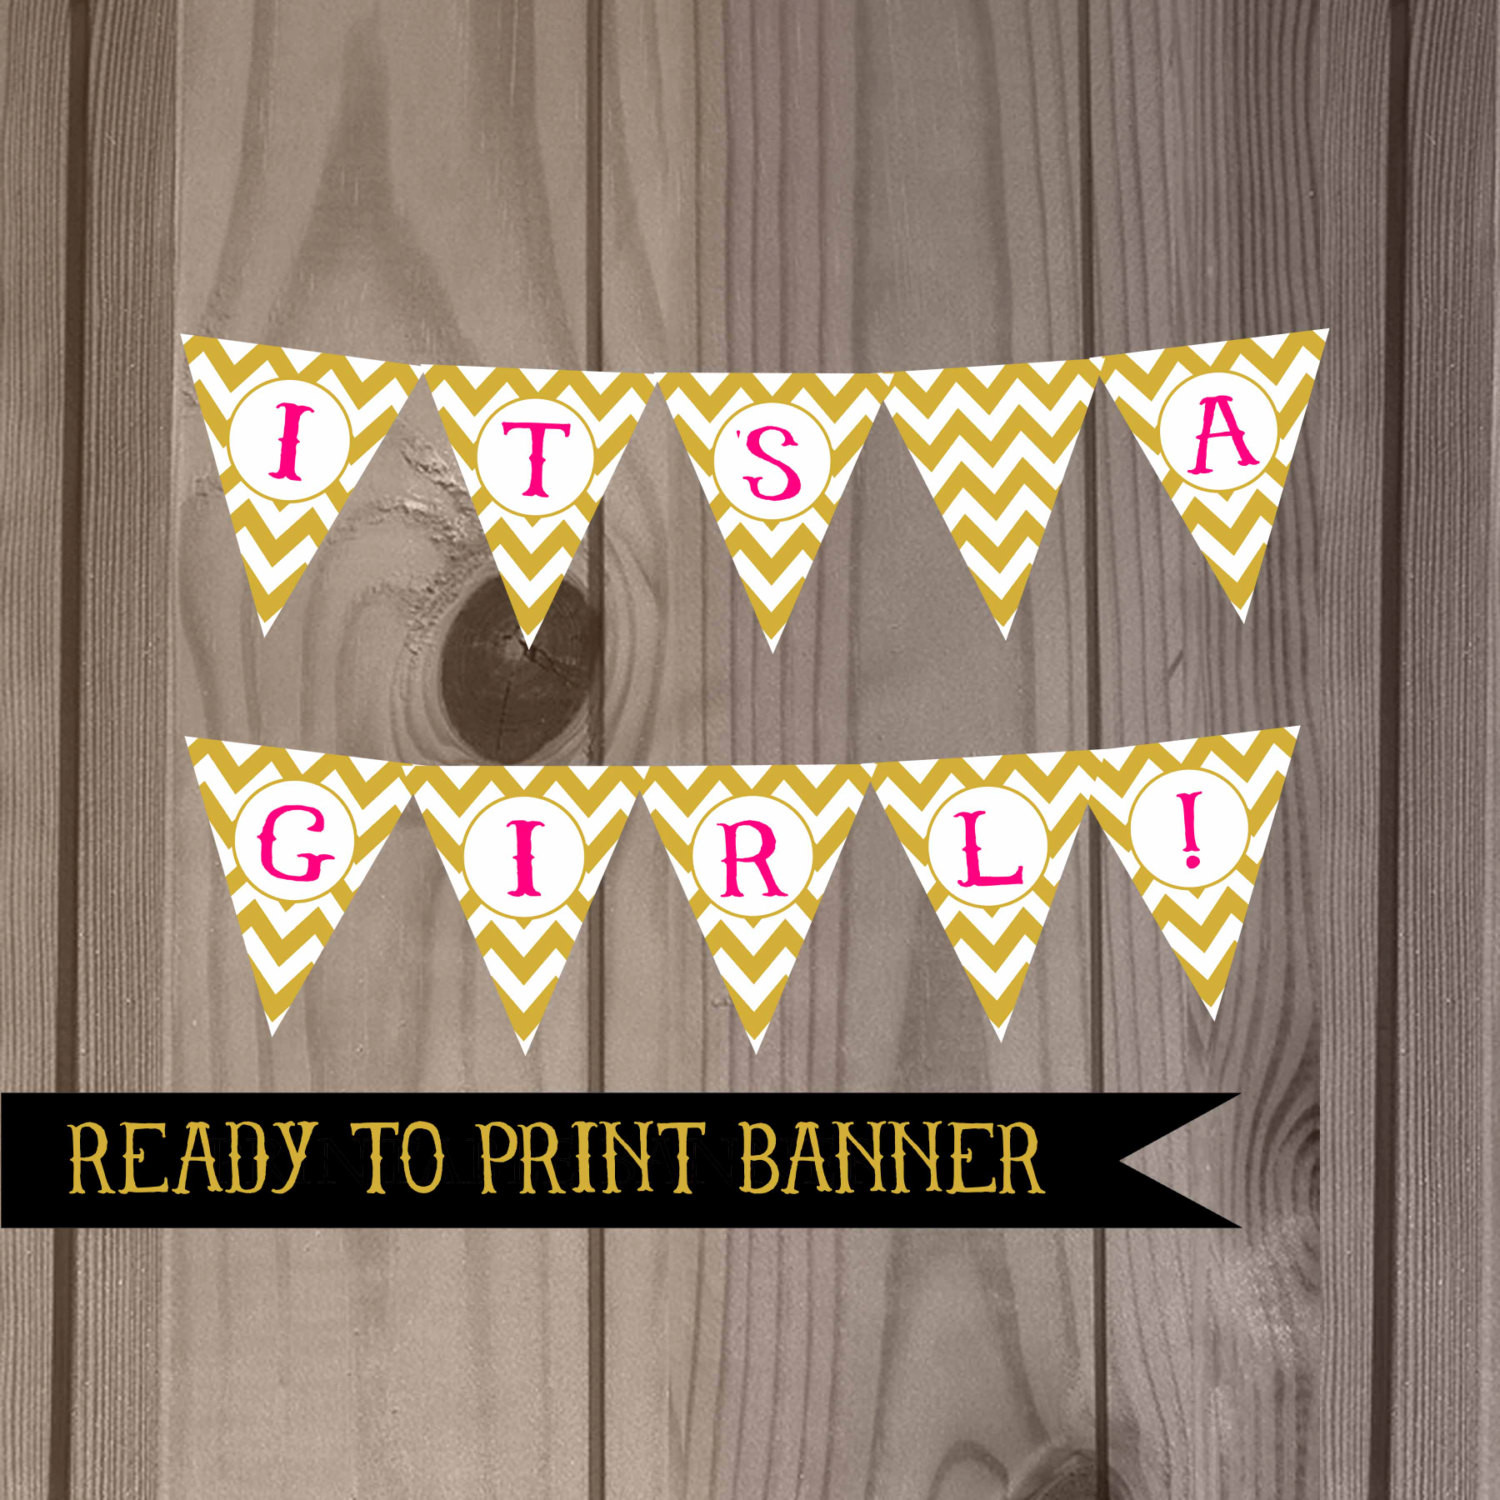 DIY Baby Shower Banners
 It s A Girl Banner Baby Shower Banner DIY by